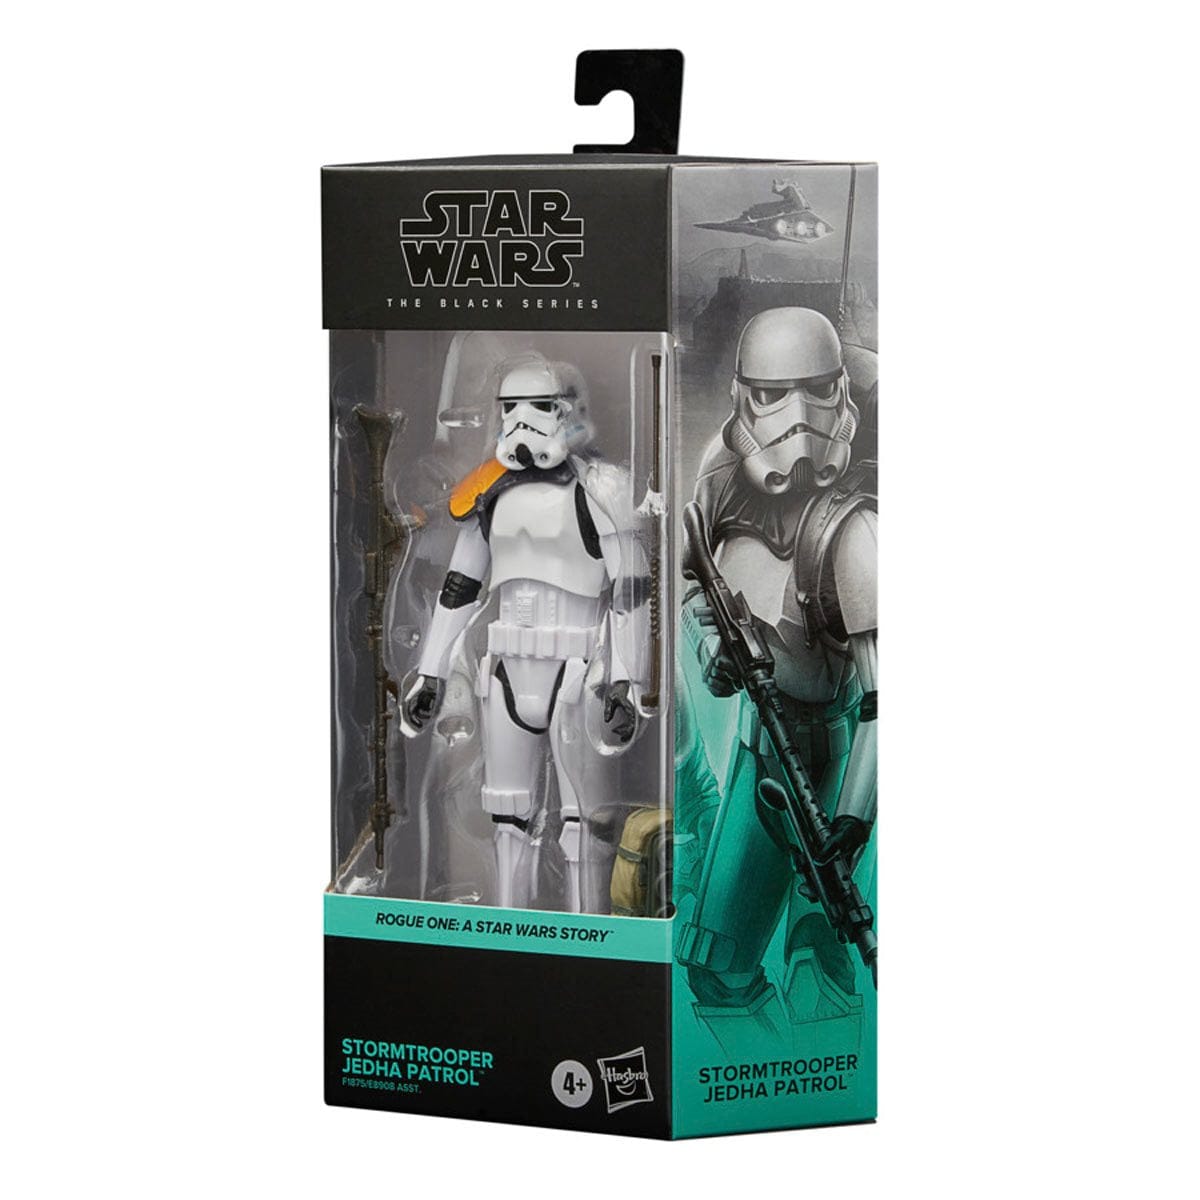 Star Wars The Black Series Stormtrooper Jedha Patrol 6-Inch Action Figure in box side view